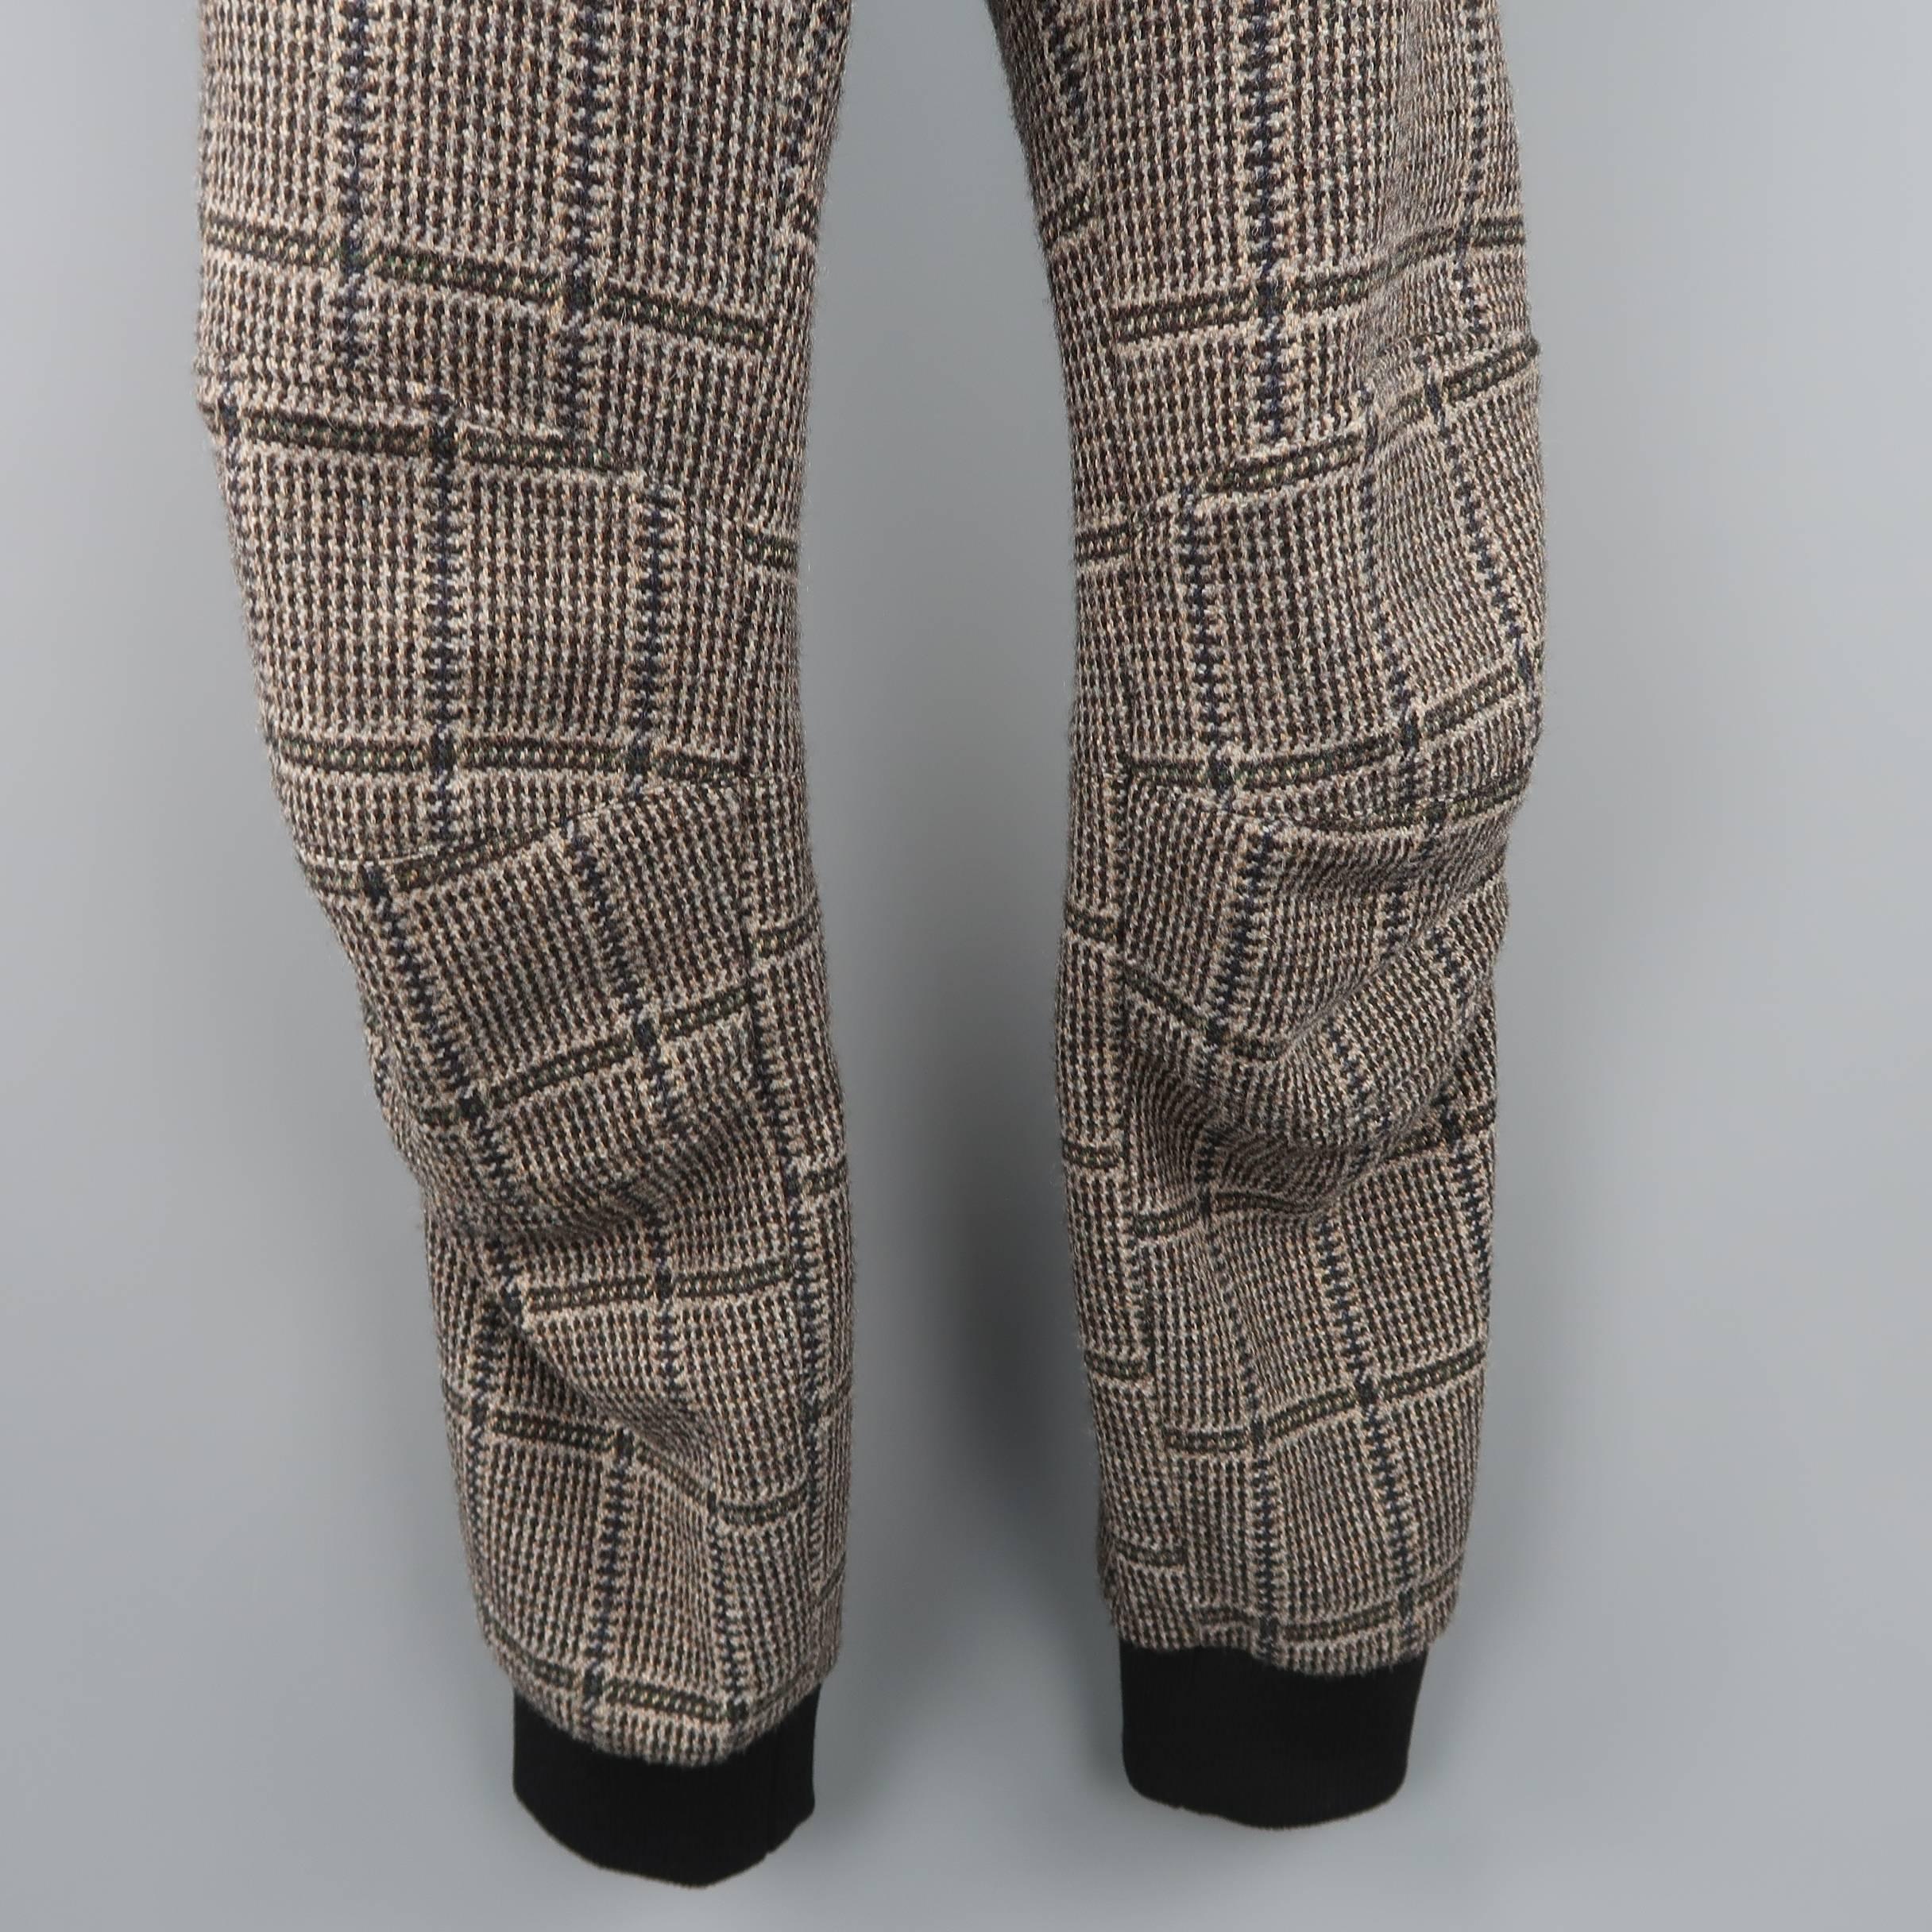 DRIES VAN NOTEN joggers come in a beige glenplaid wool flannel with a drawstring waistband, knee pad panels, and black elastic cuffs. Made in Romania.
 
Good Pre-Owned Condition.
Marked: IT 50
 
Measurements:
 
Waist: 34 in.
Rise: 10 in.
Inseam: 31